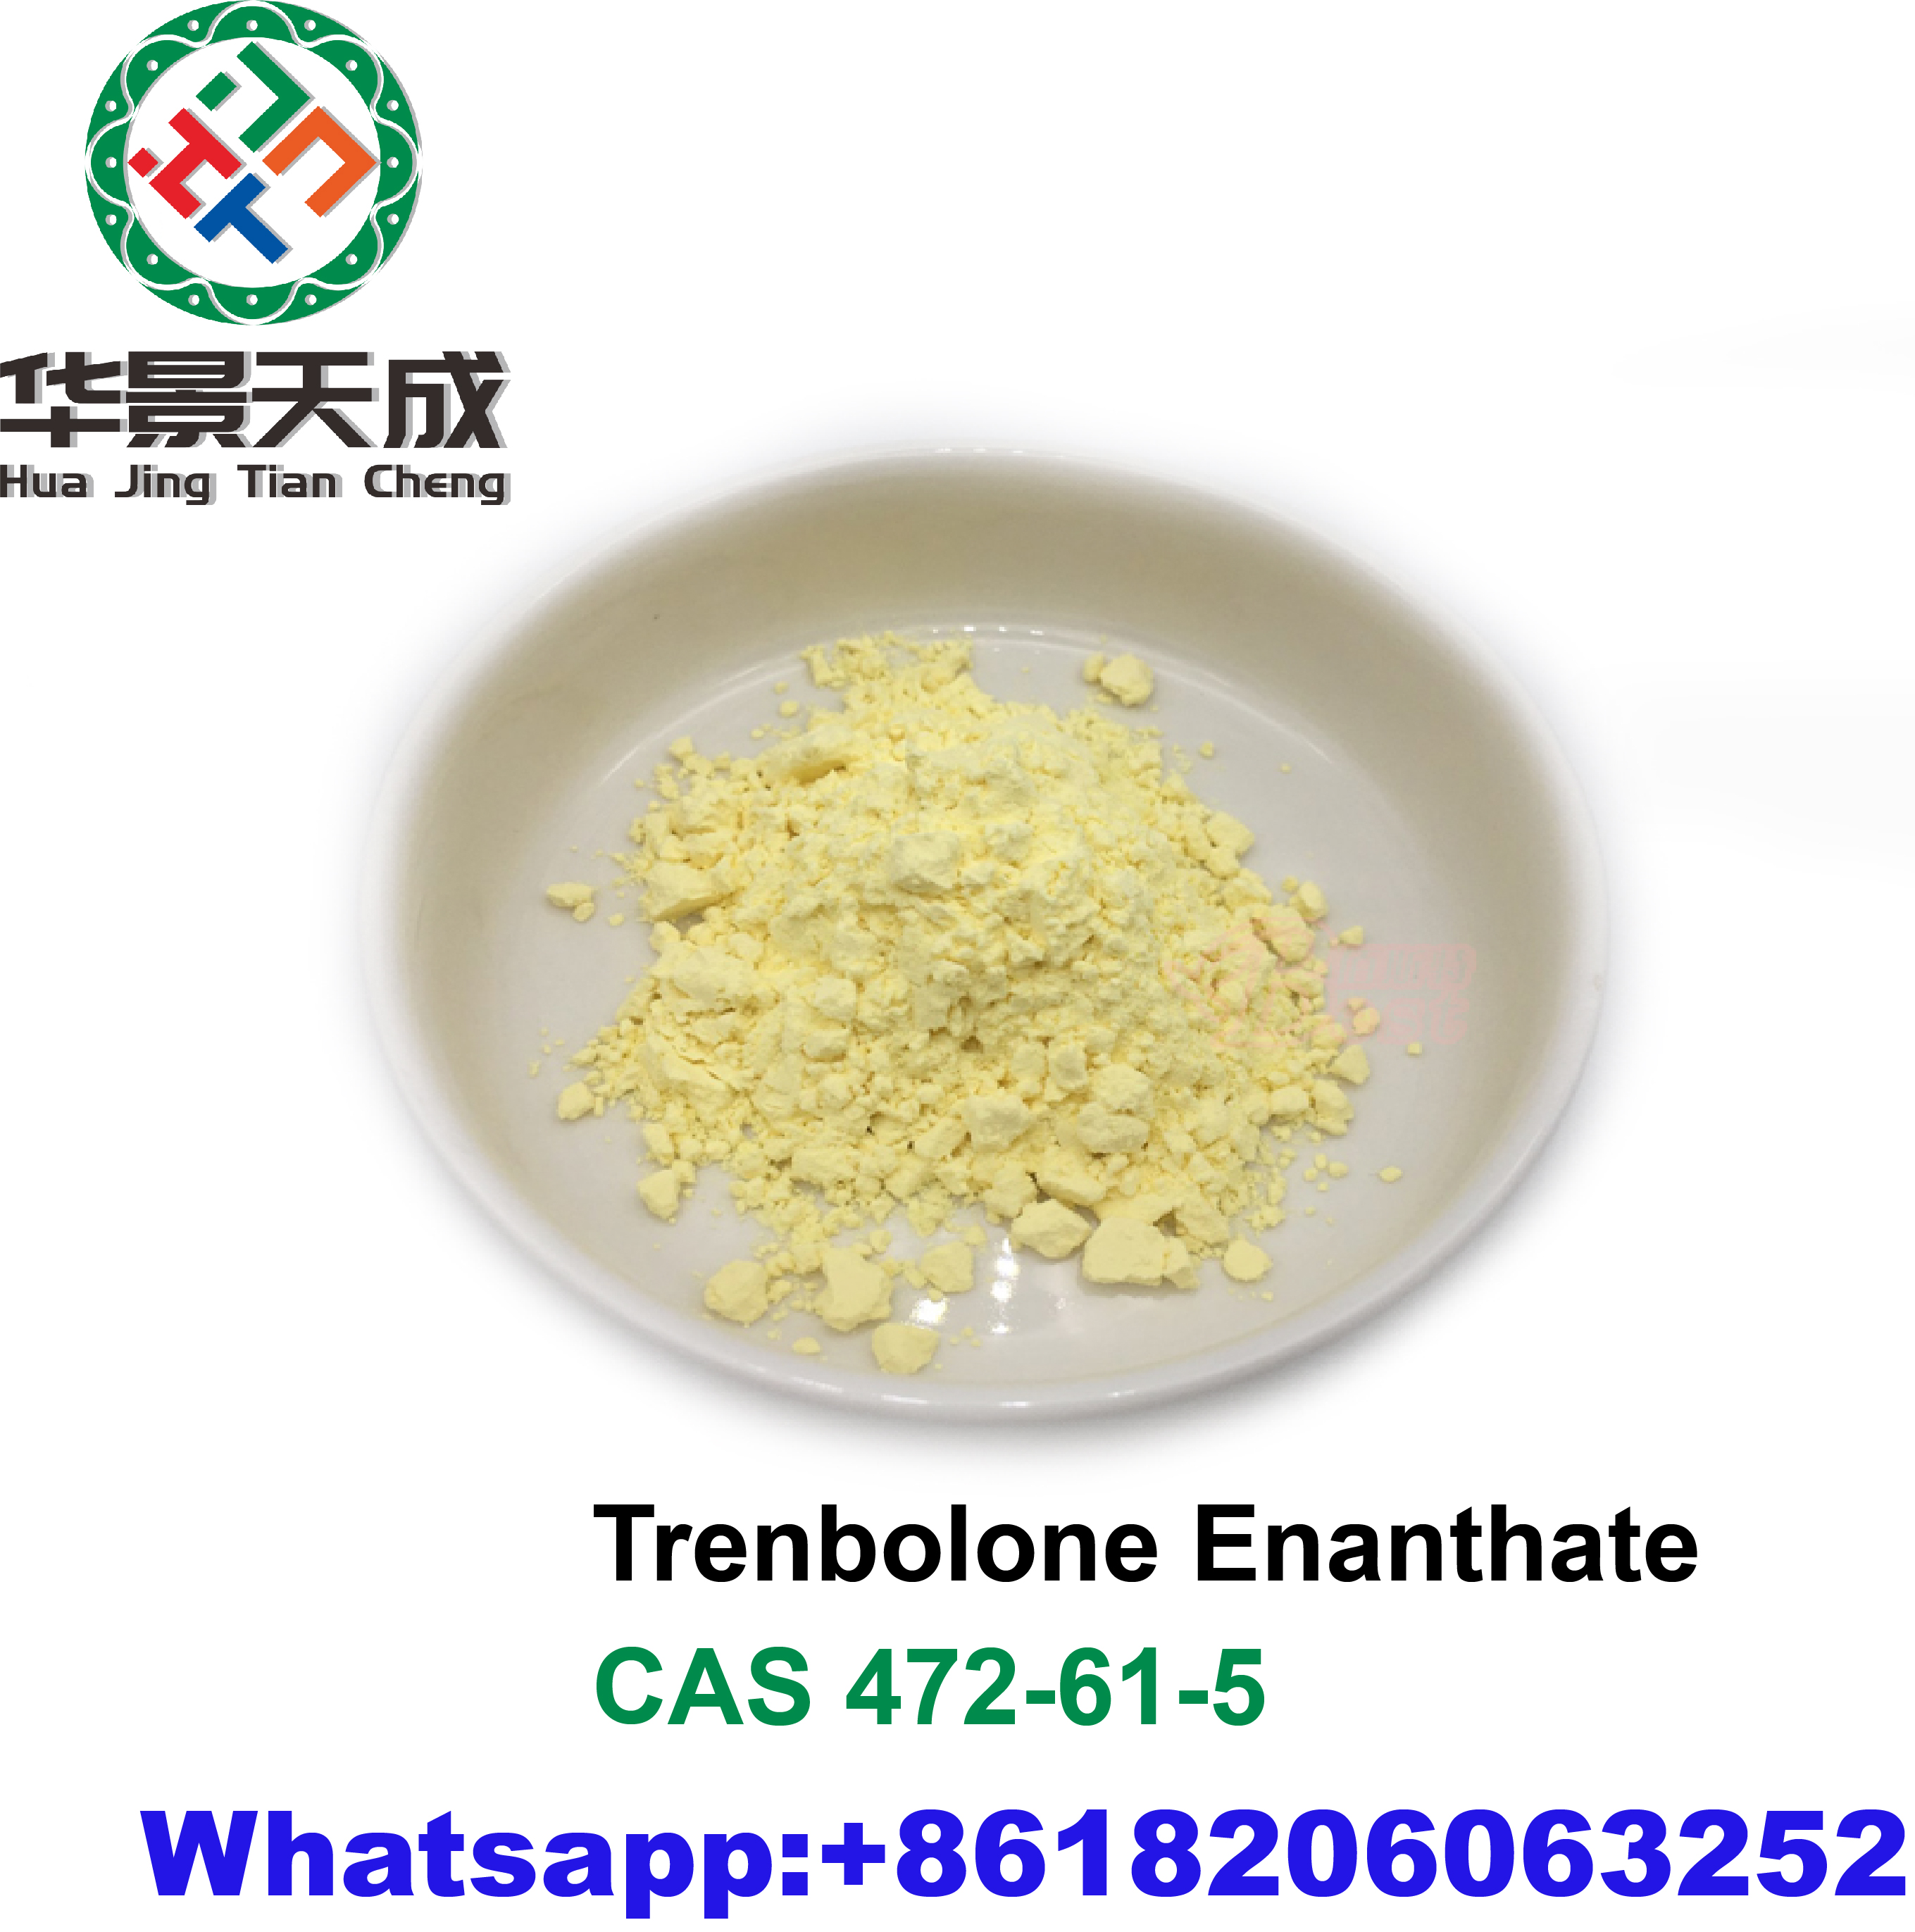 99% Purity parabolan Trenbolone Enanthate Raw Powder Steroids with USA Canada Domestic Shipping Featured Image